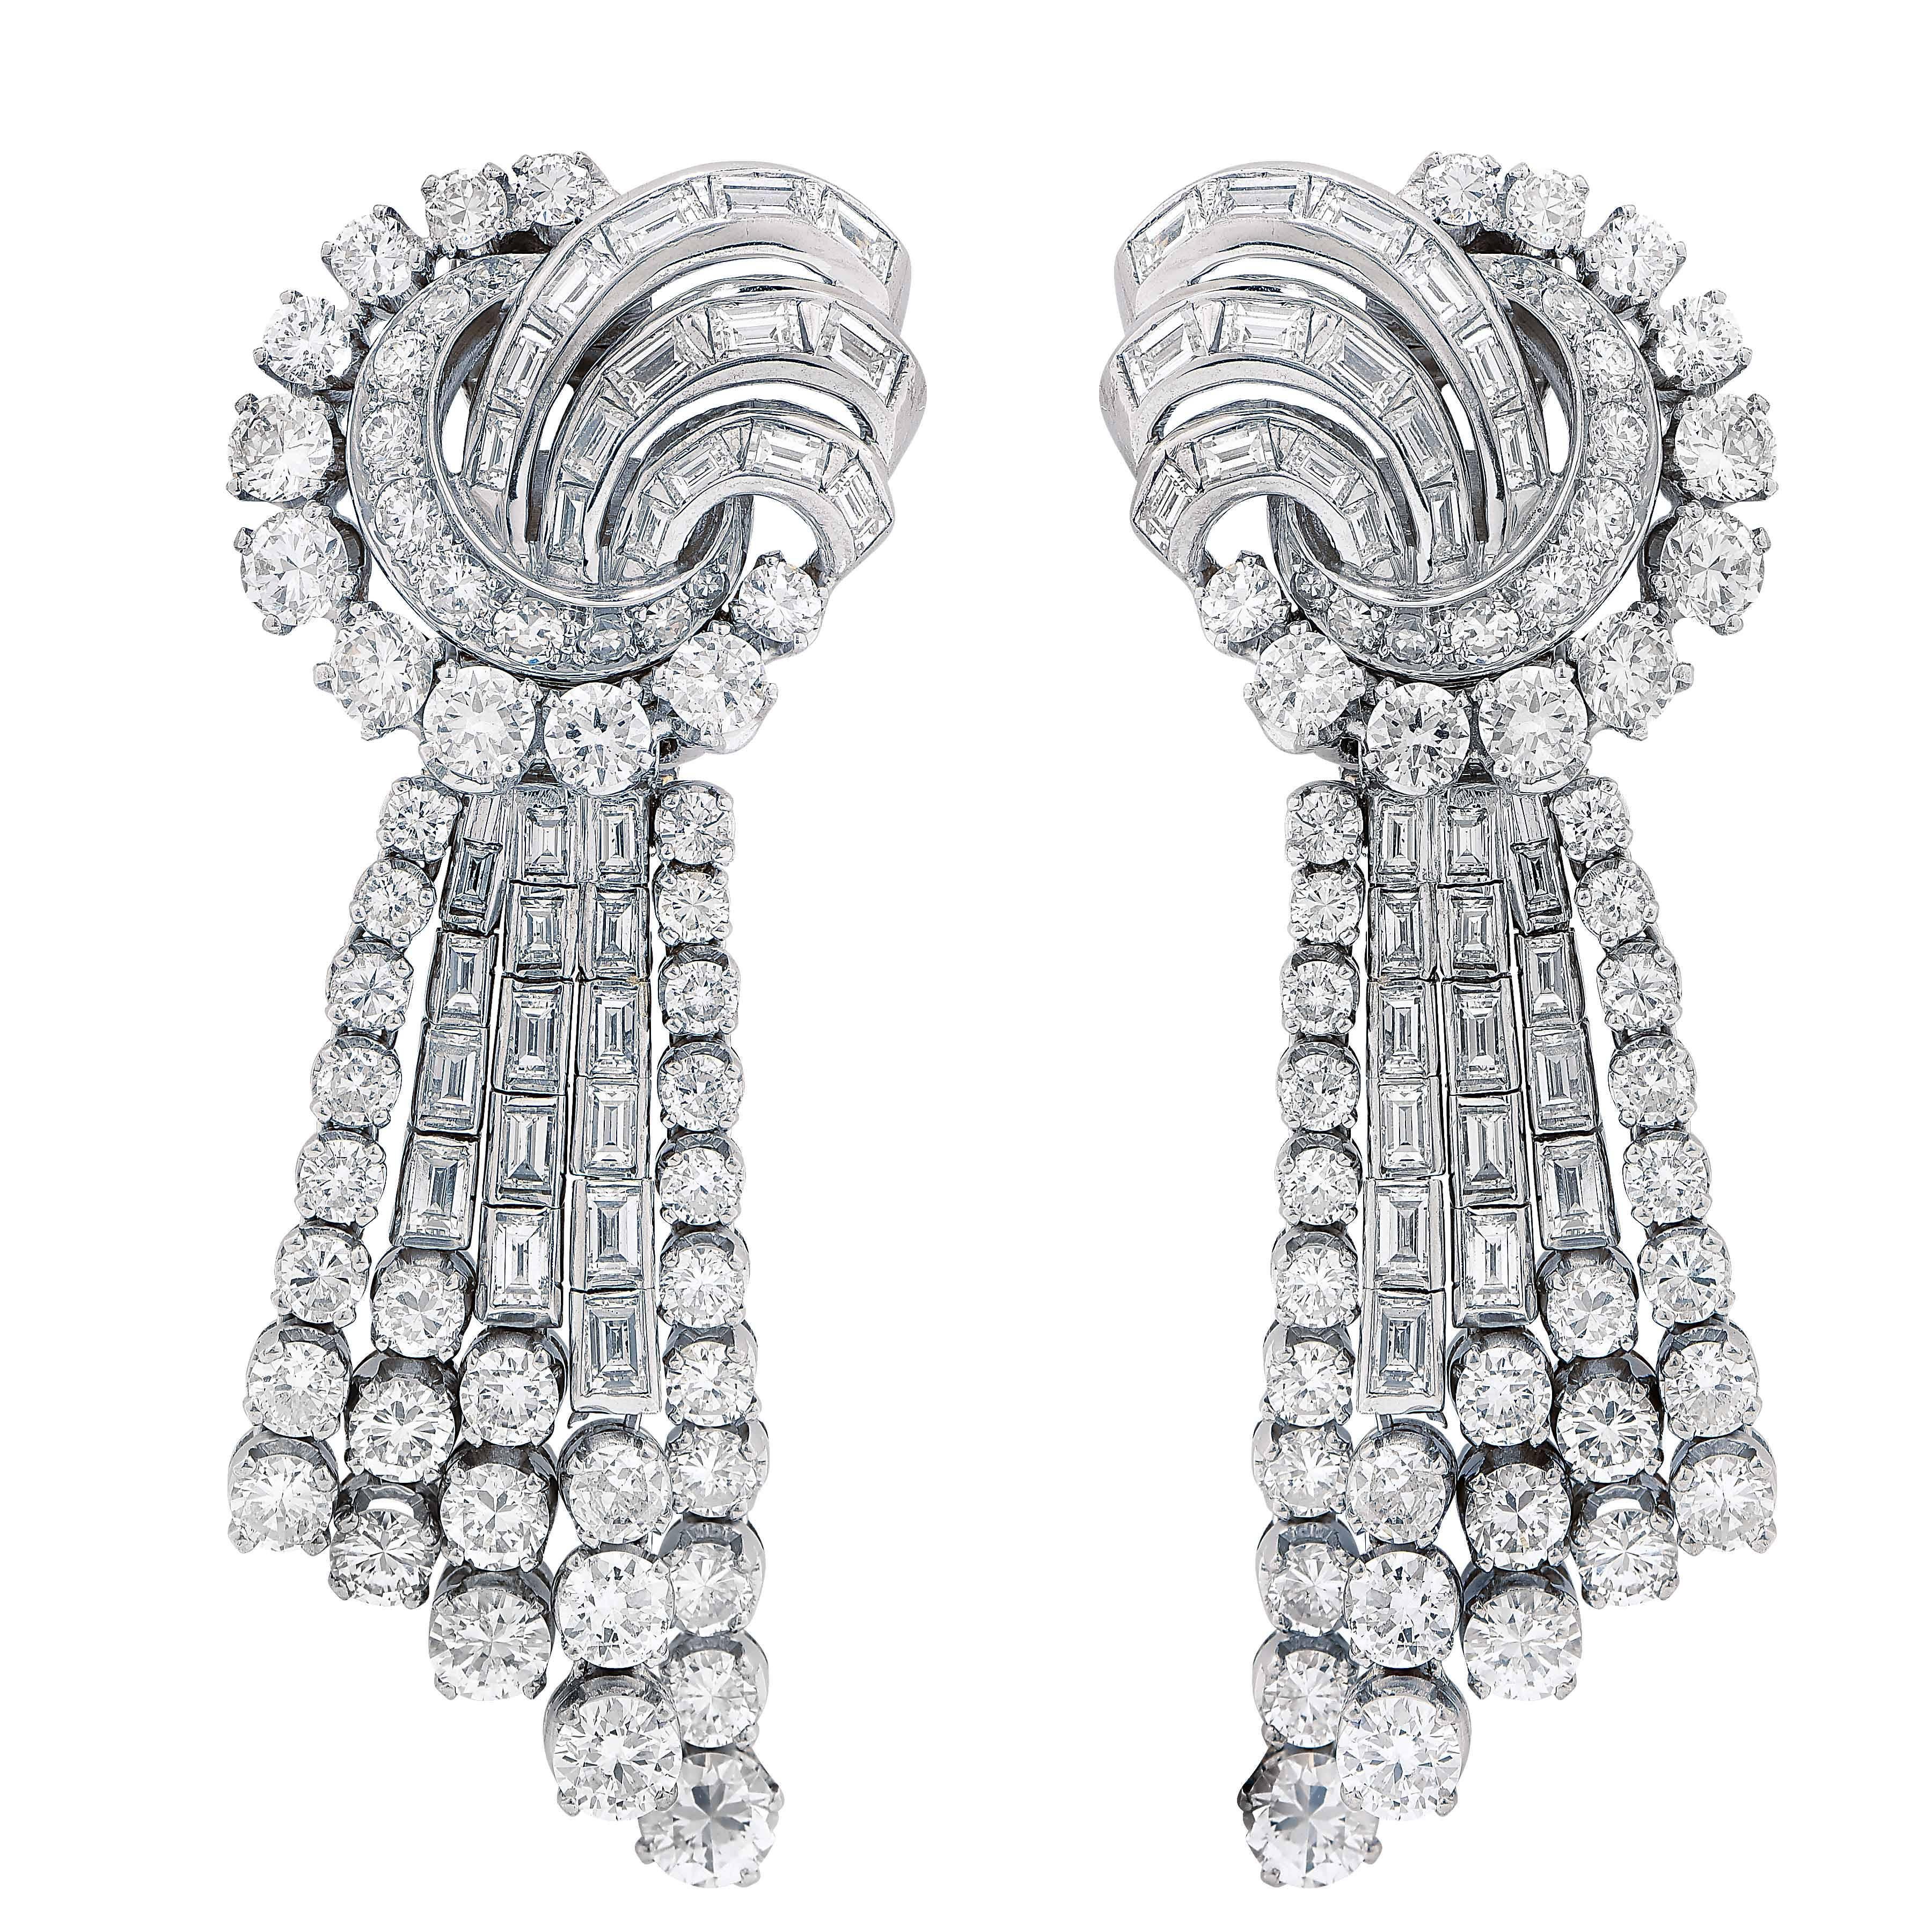 Pendant ear clips set with round and tapered baguette diamonds weighing approximately 12.12 carats, set in platinum. Detachable bottoms. 
Diamonds average G color VS2 clarity.

Metal Type: Platinum Stamped or Tested
Metal Weight: 45.8 grams